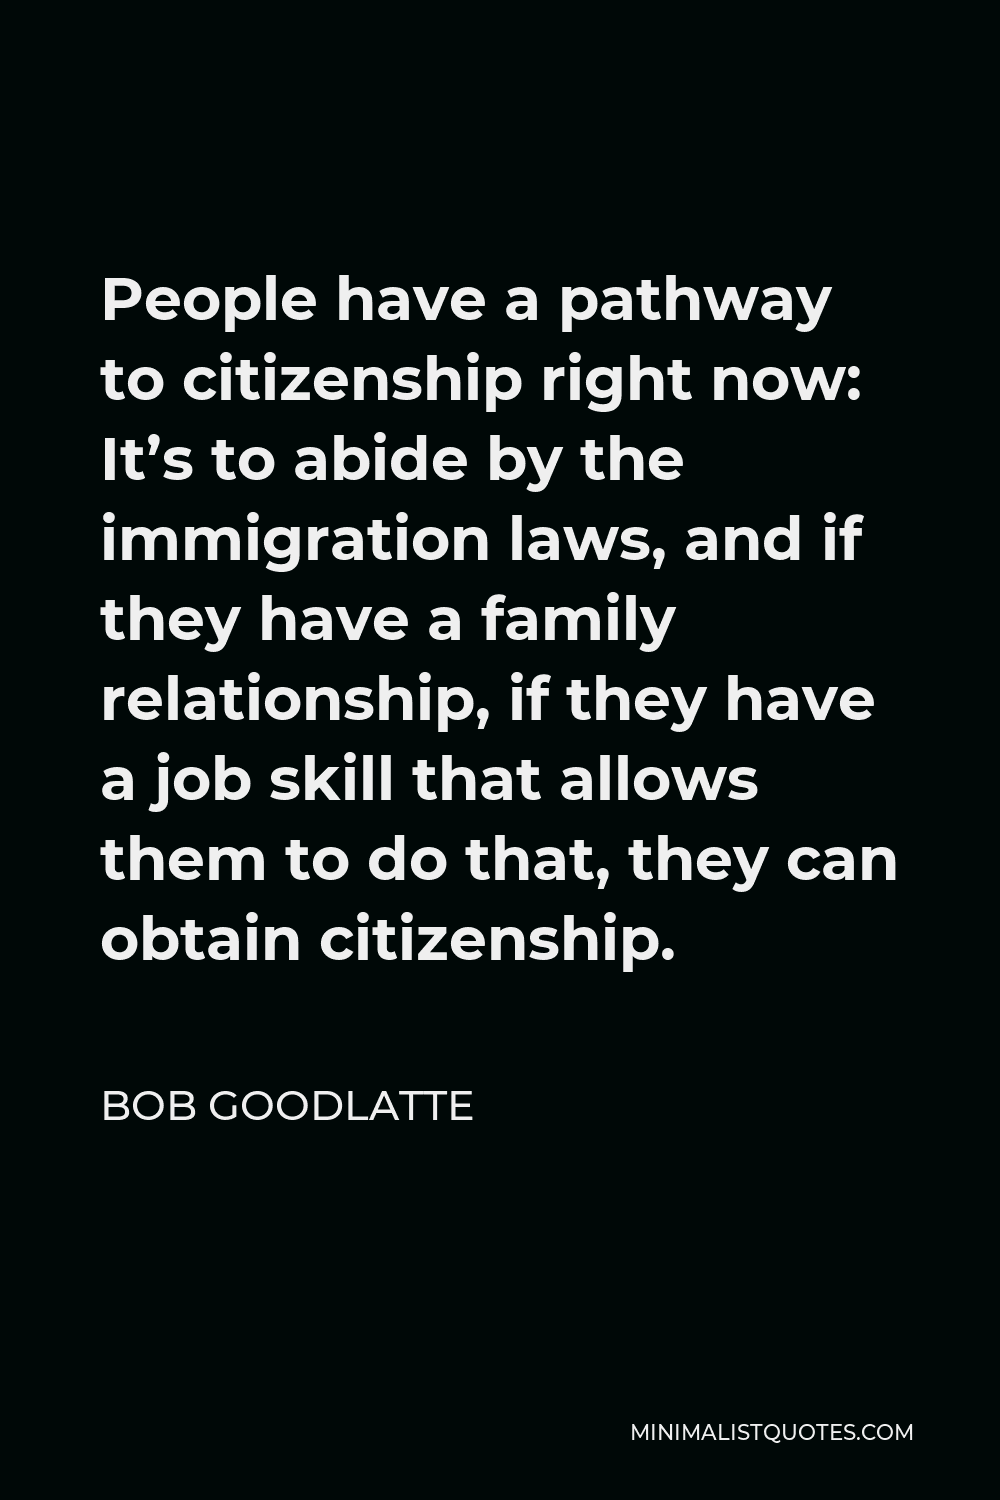 Bob Goodlatte Quote - People have a pathway to citizenship right now: It’s to abide by the immigration laws, and if they have a family relationship, if they have a job skill that allows them to do that, they can obtain citizenship.